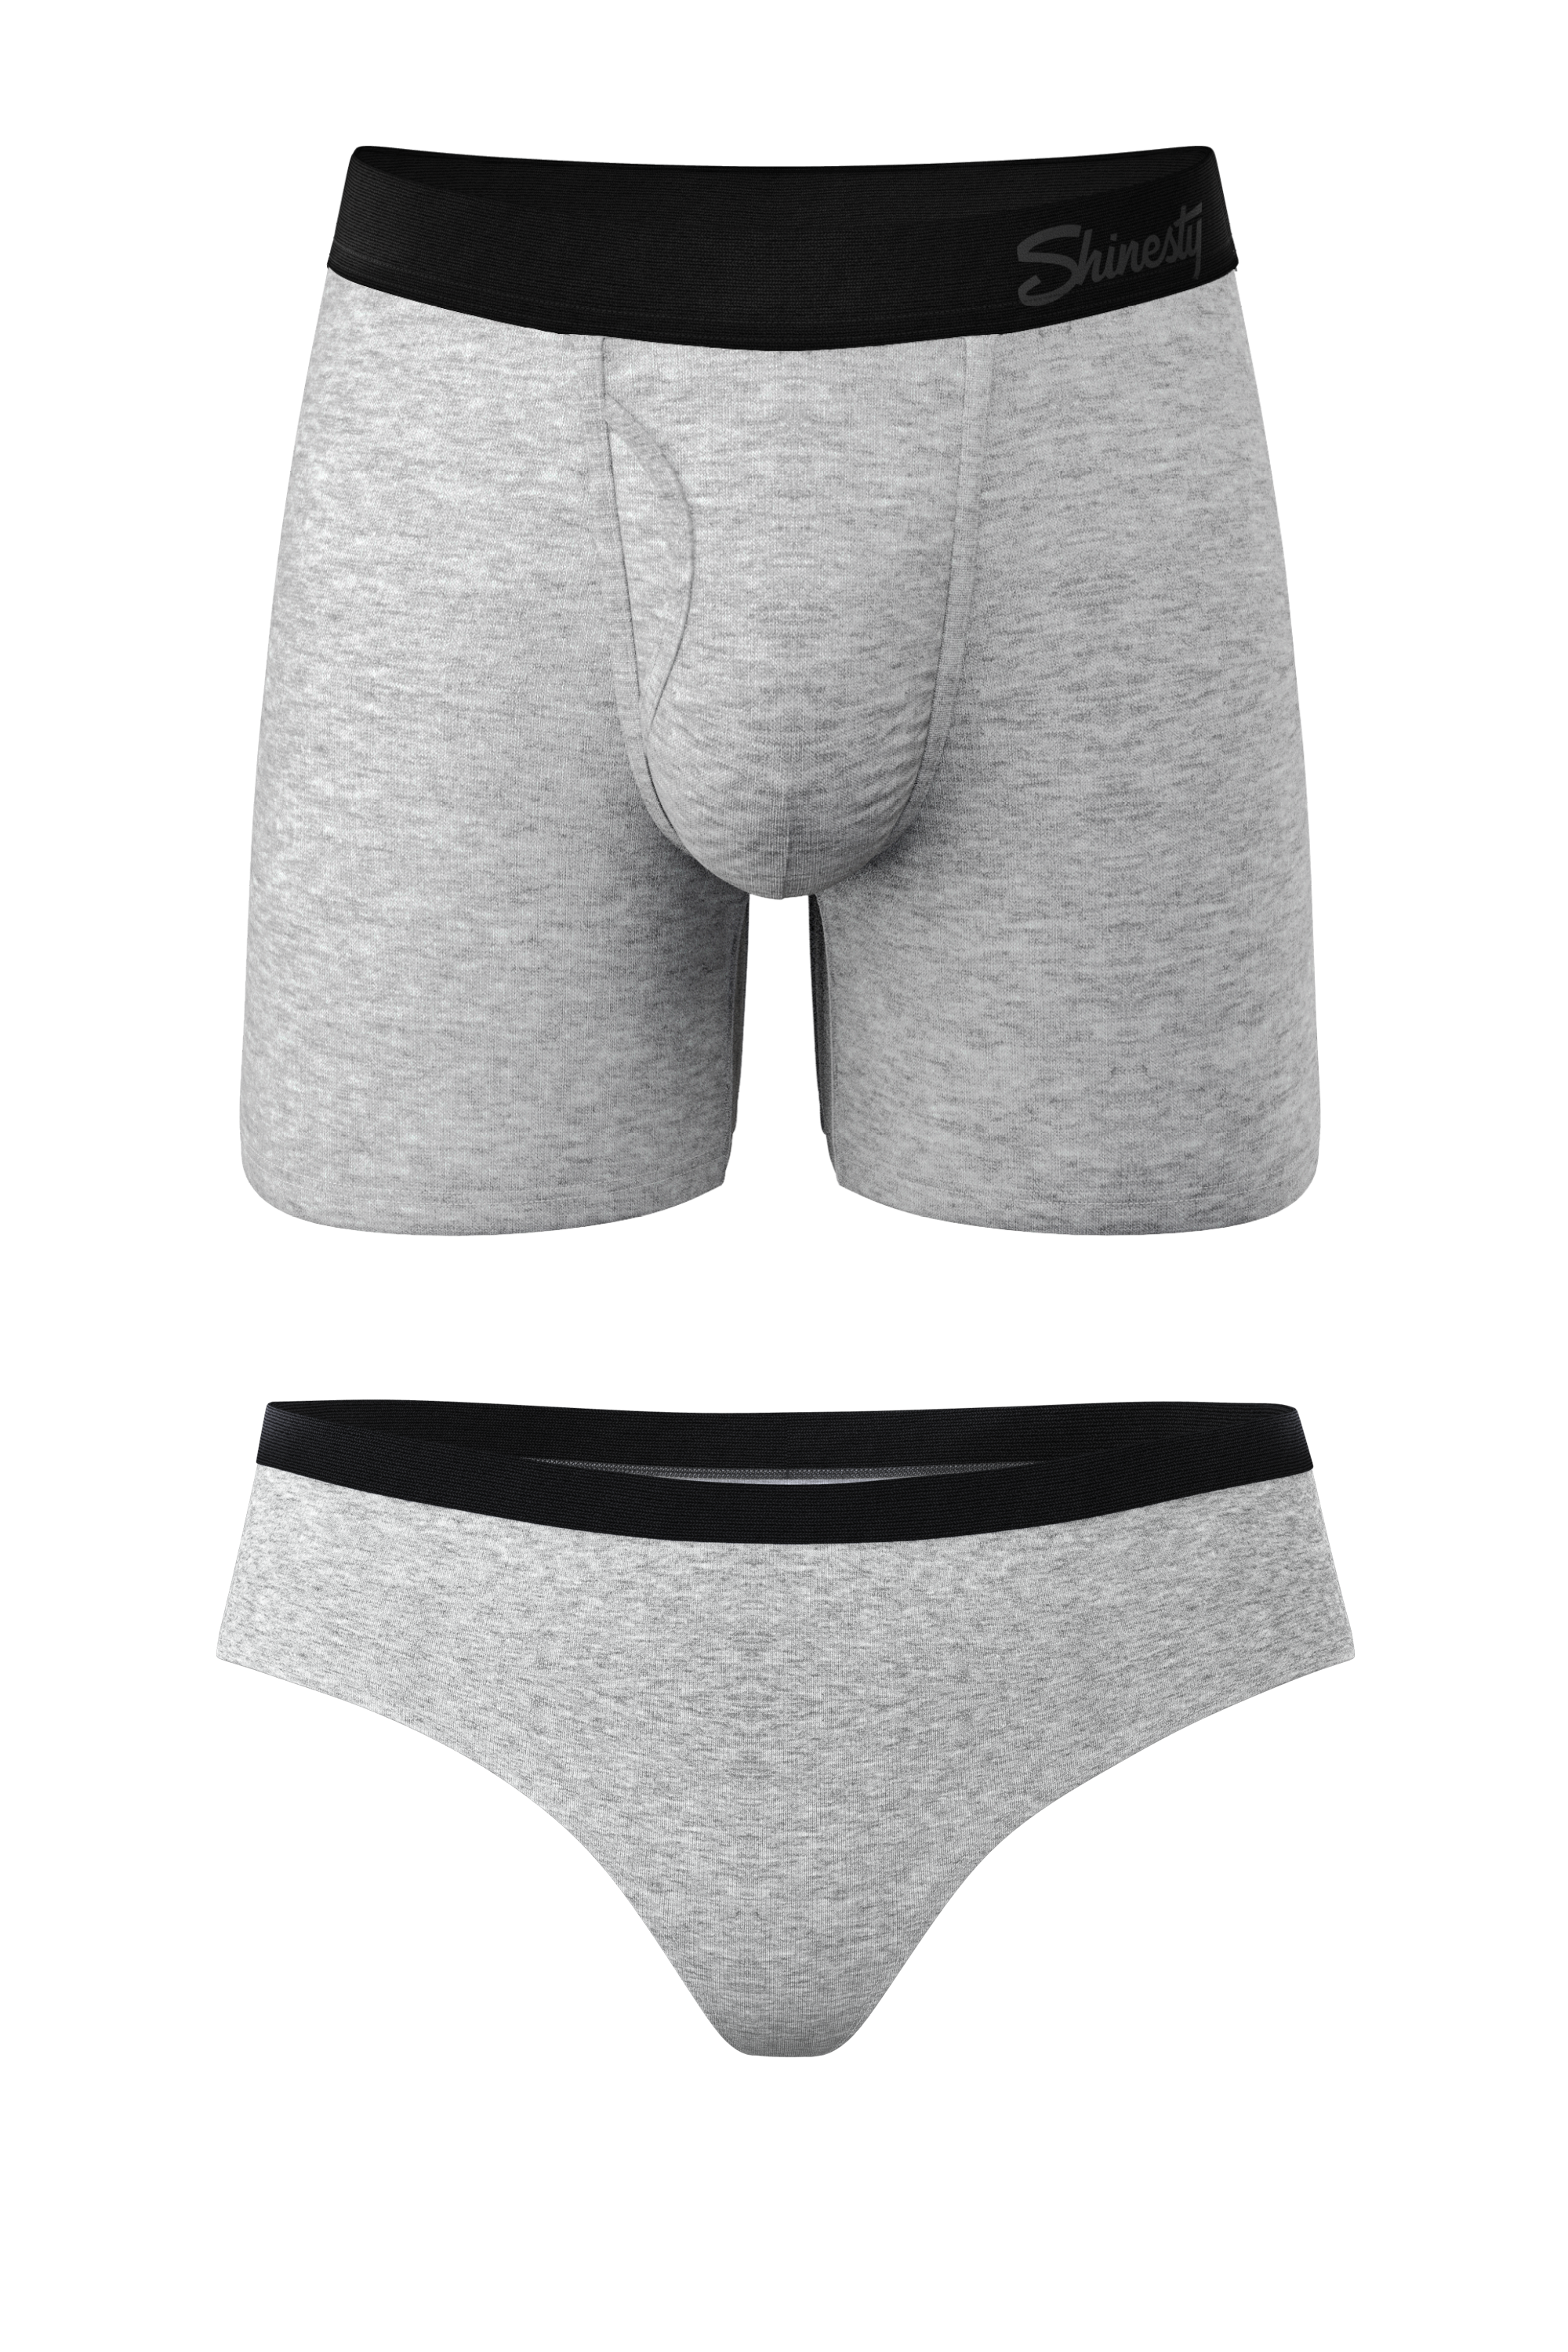 Gray Matching Underwear for Couples